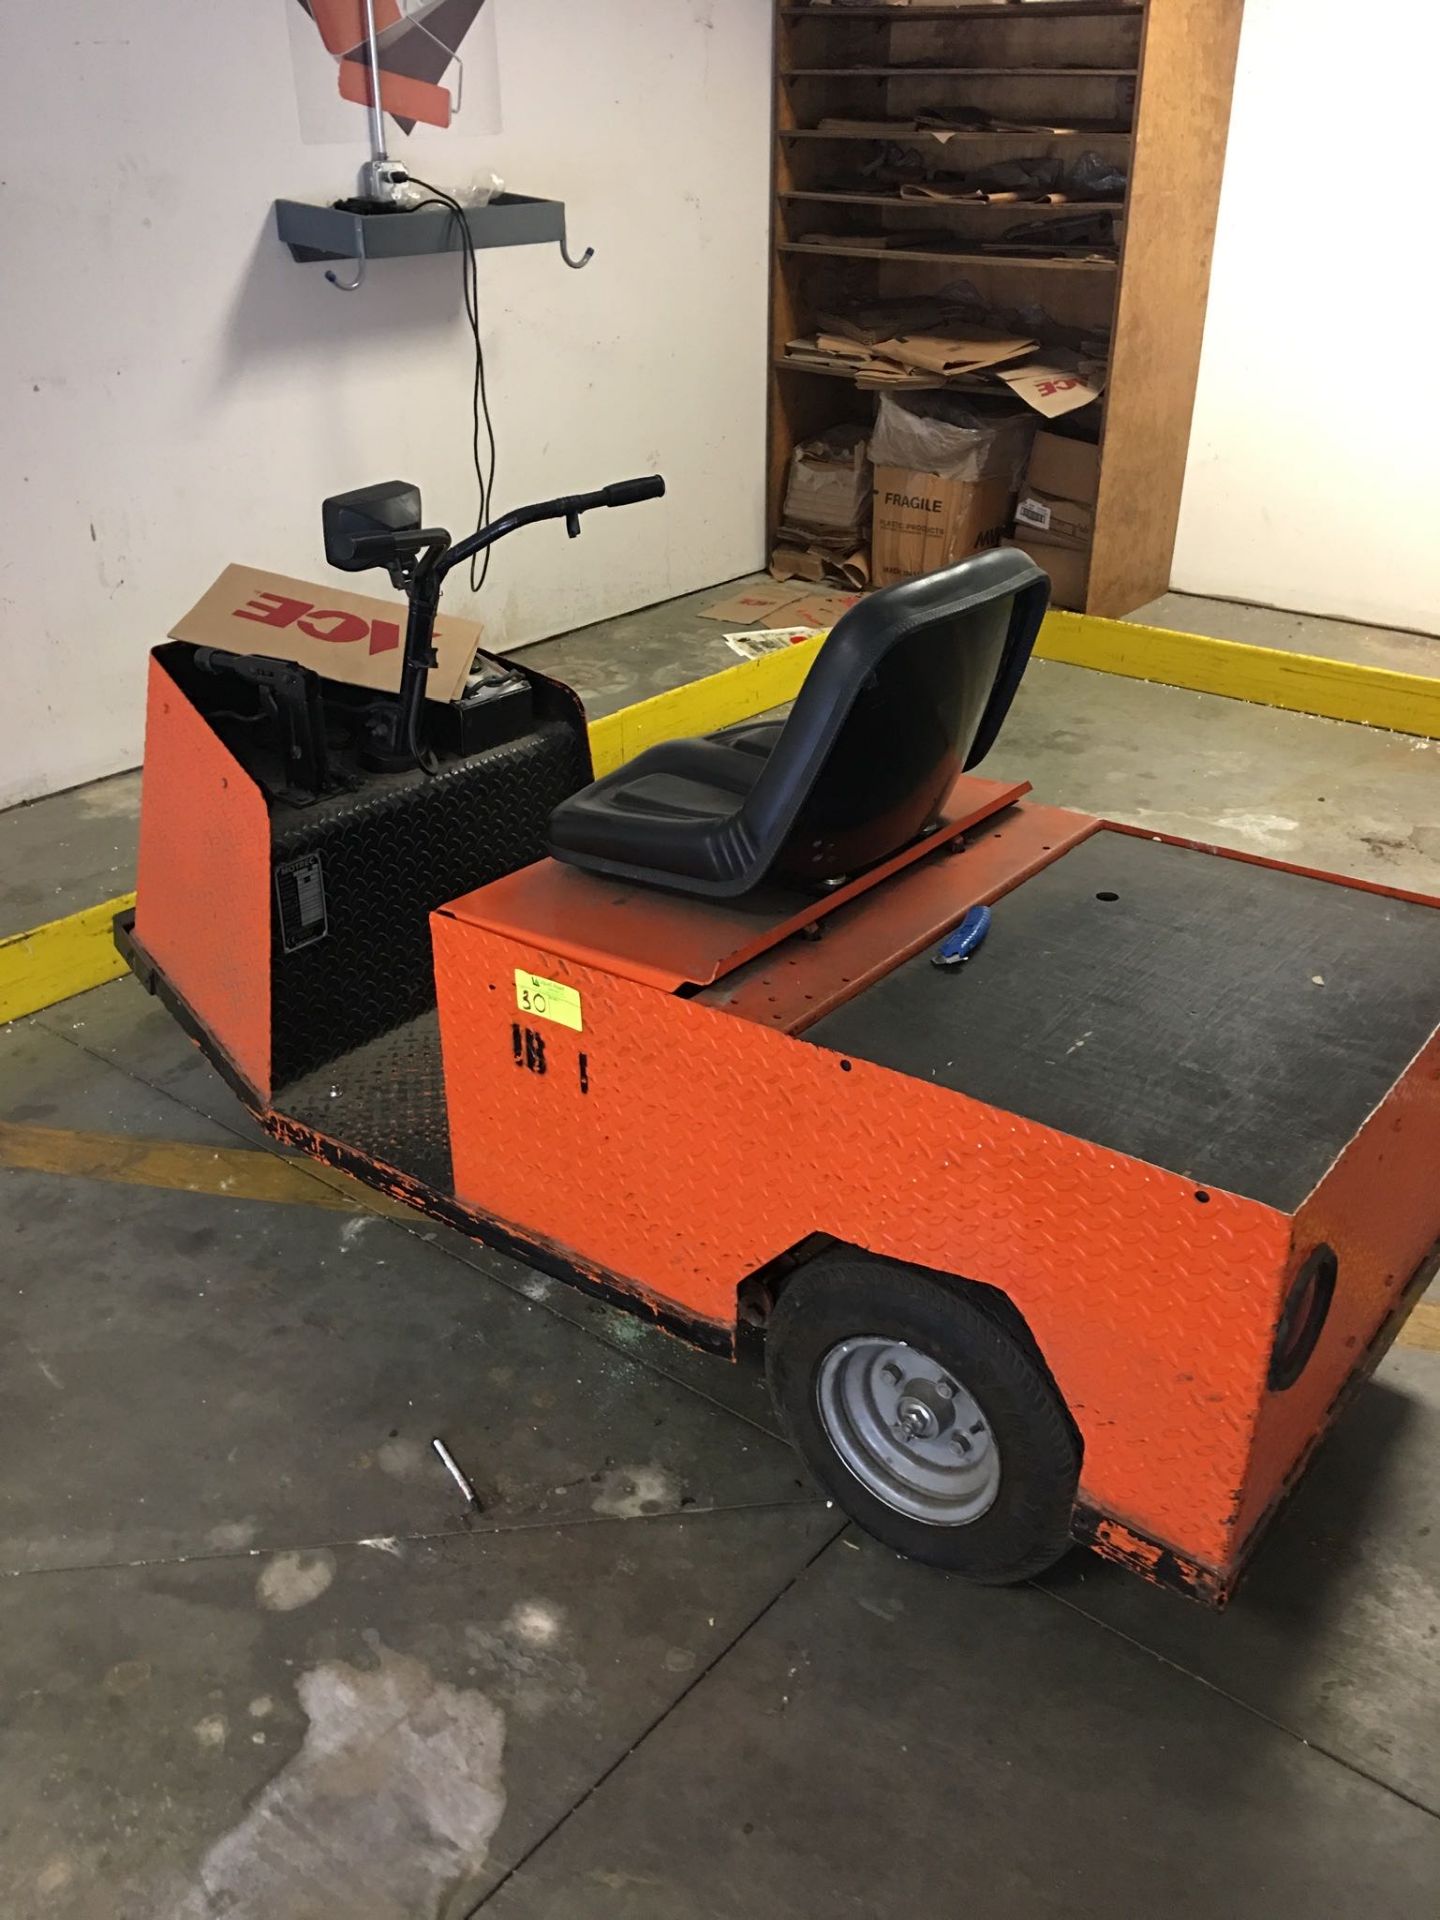 Asset 1B1 - Mortec L-242 S/N: 1046291 orange service cart. Please see photos for additional